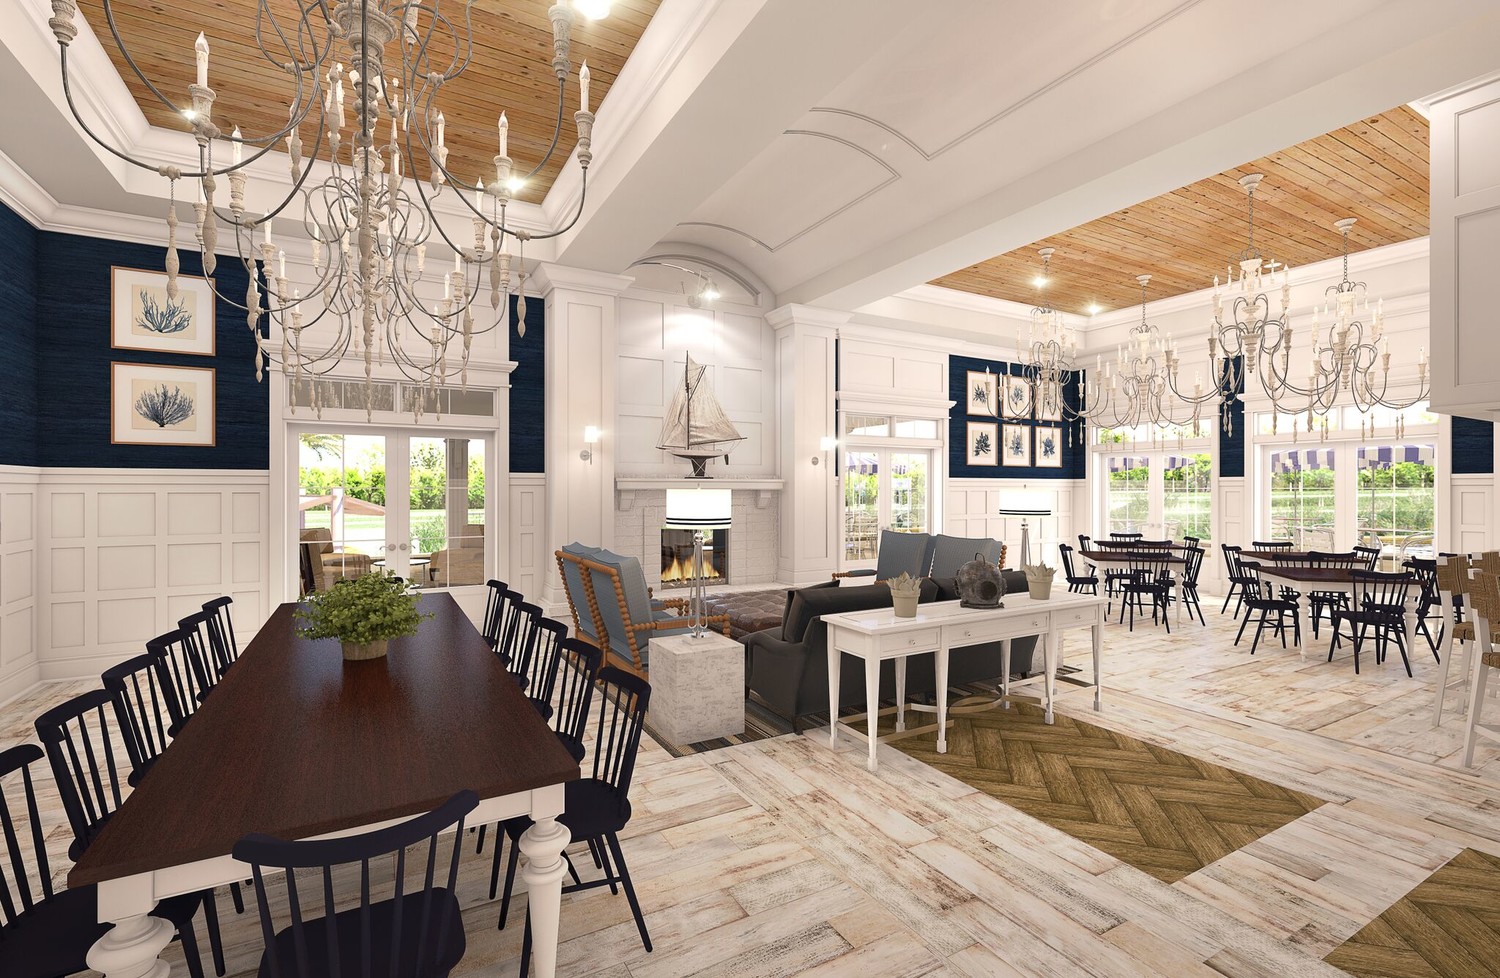 As displayed in the rendering, the Lake House Amenity and Fitness Center at Beacon Lake will provide opportunities for indoor and outdoor recreation — and relaxation — for residents of the community.